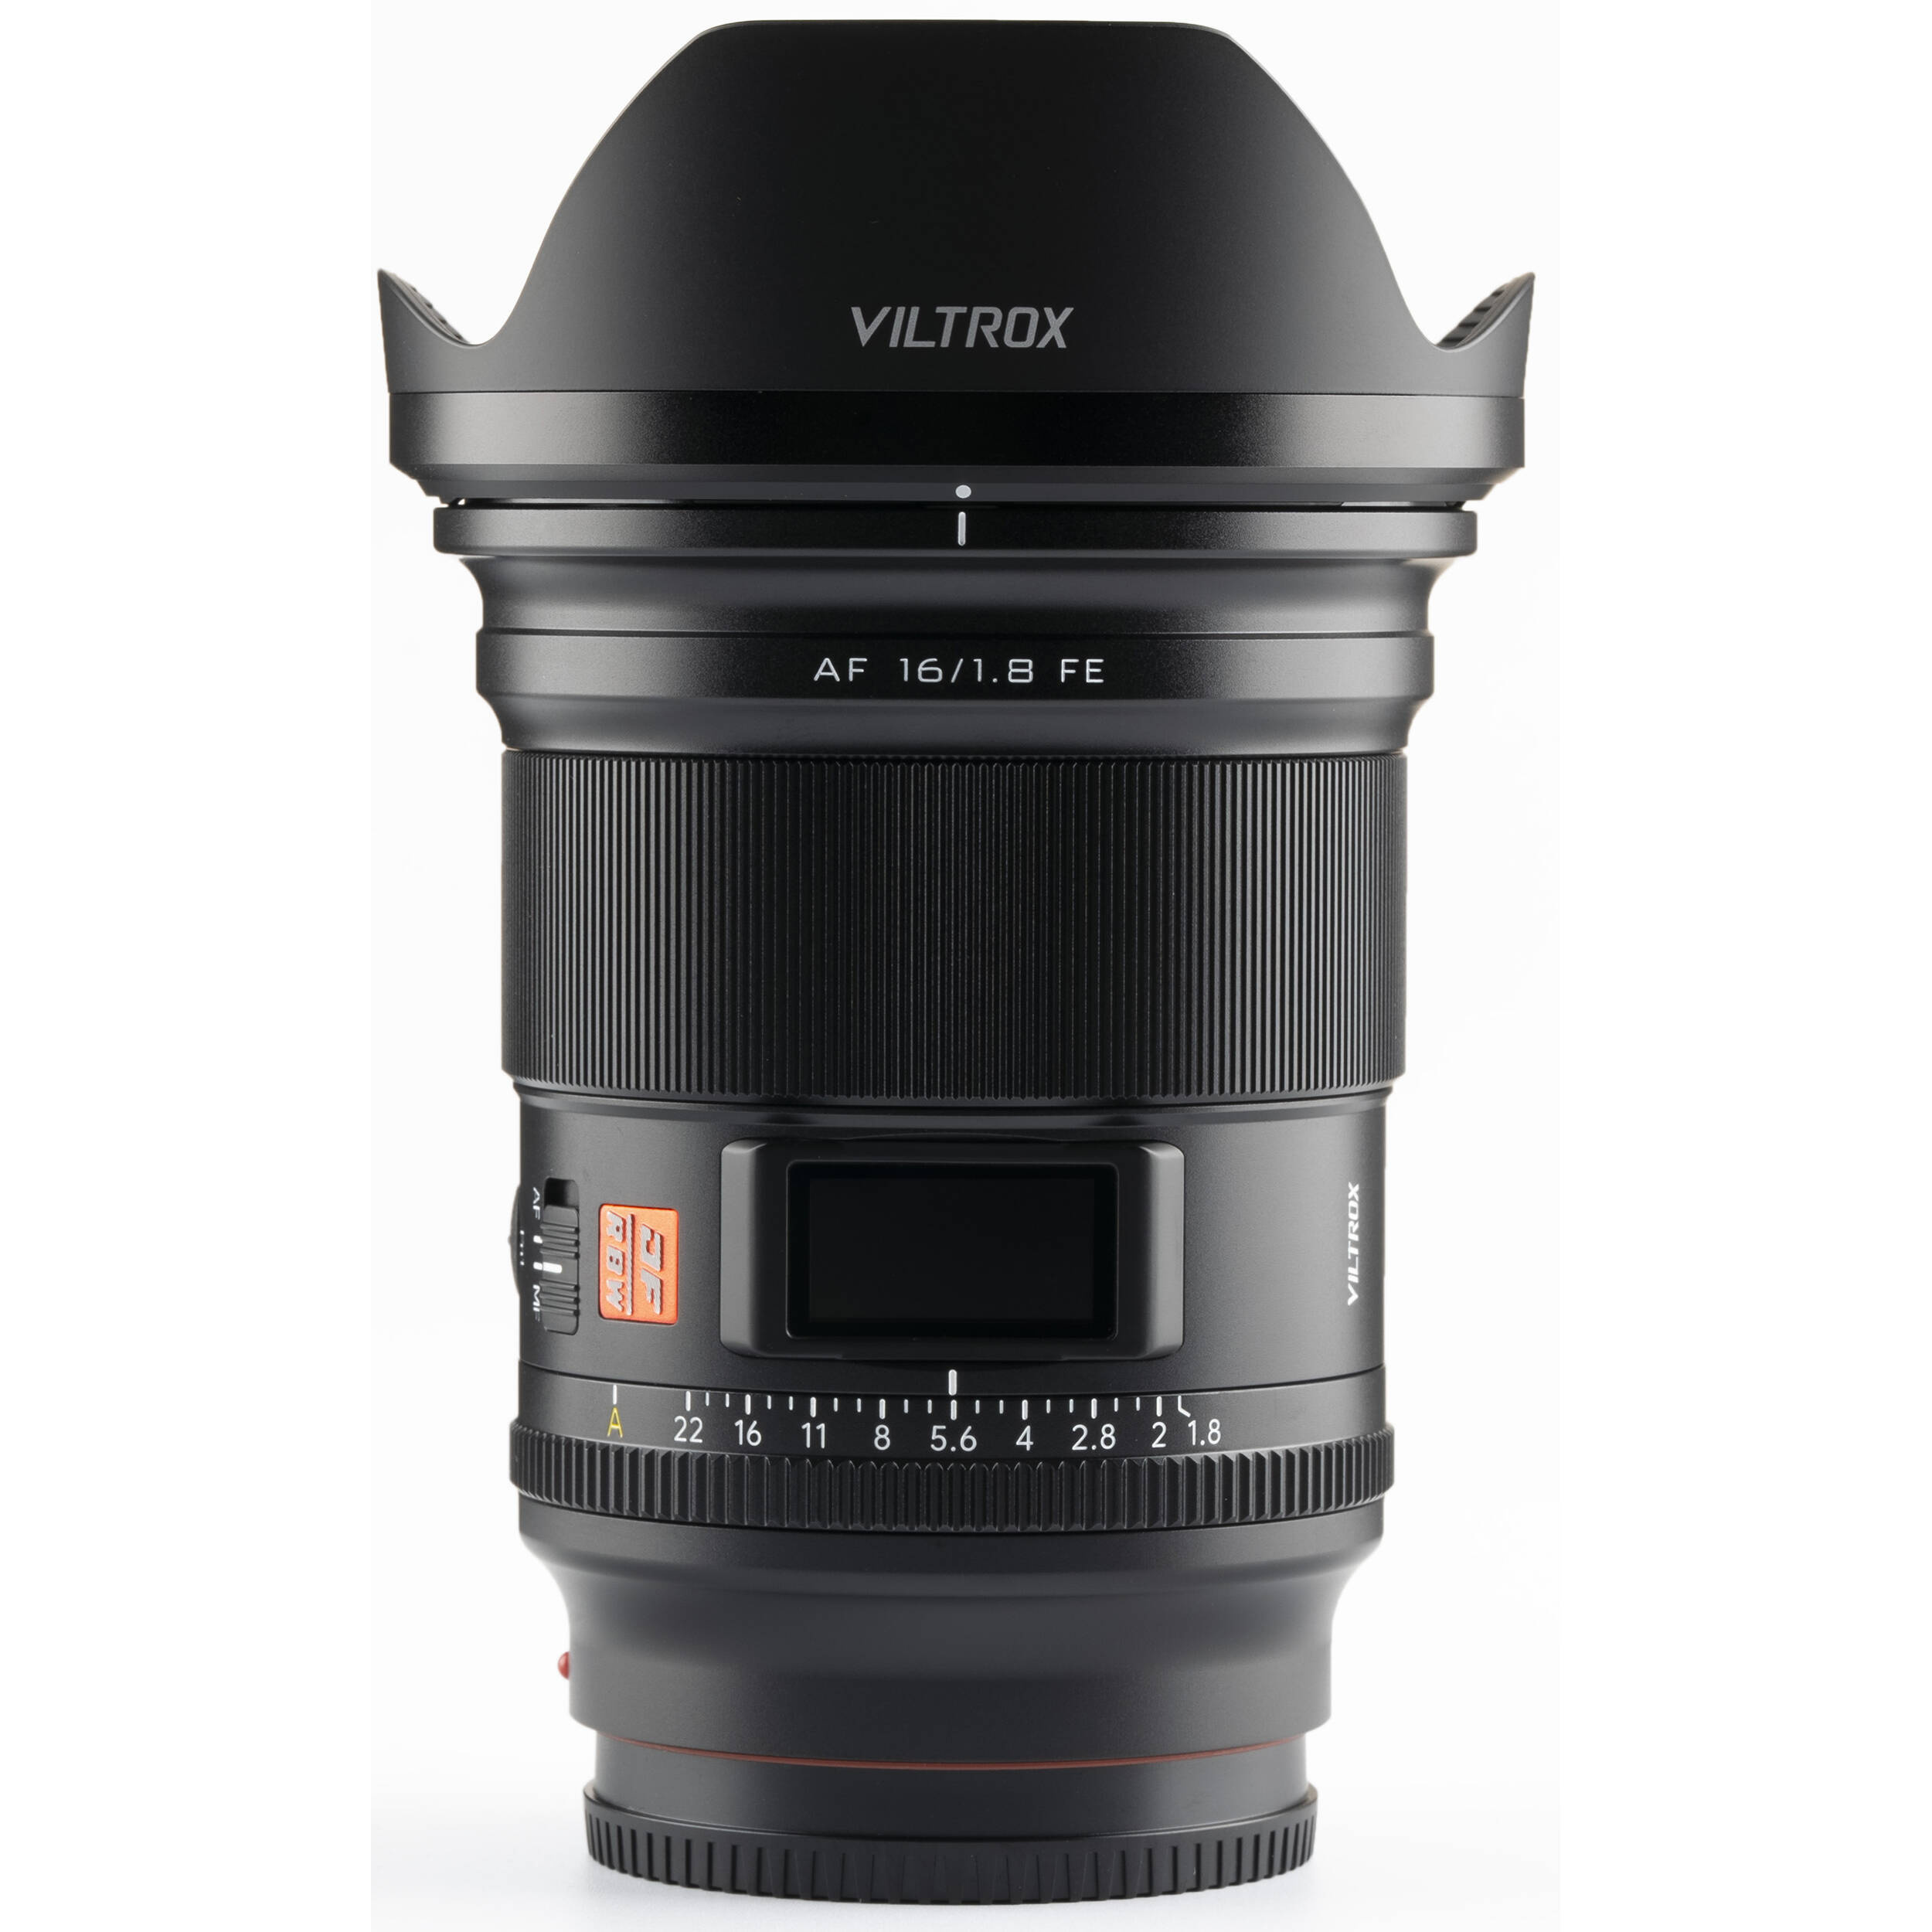 Hands-on Review, Deep Review of Viltrox 16mm f1.8 FE (Sony FE) – Pergear